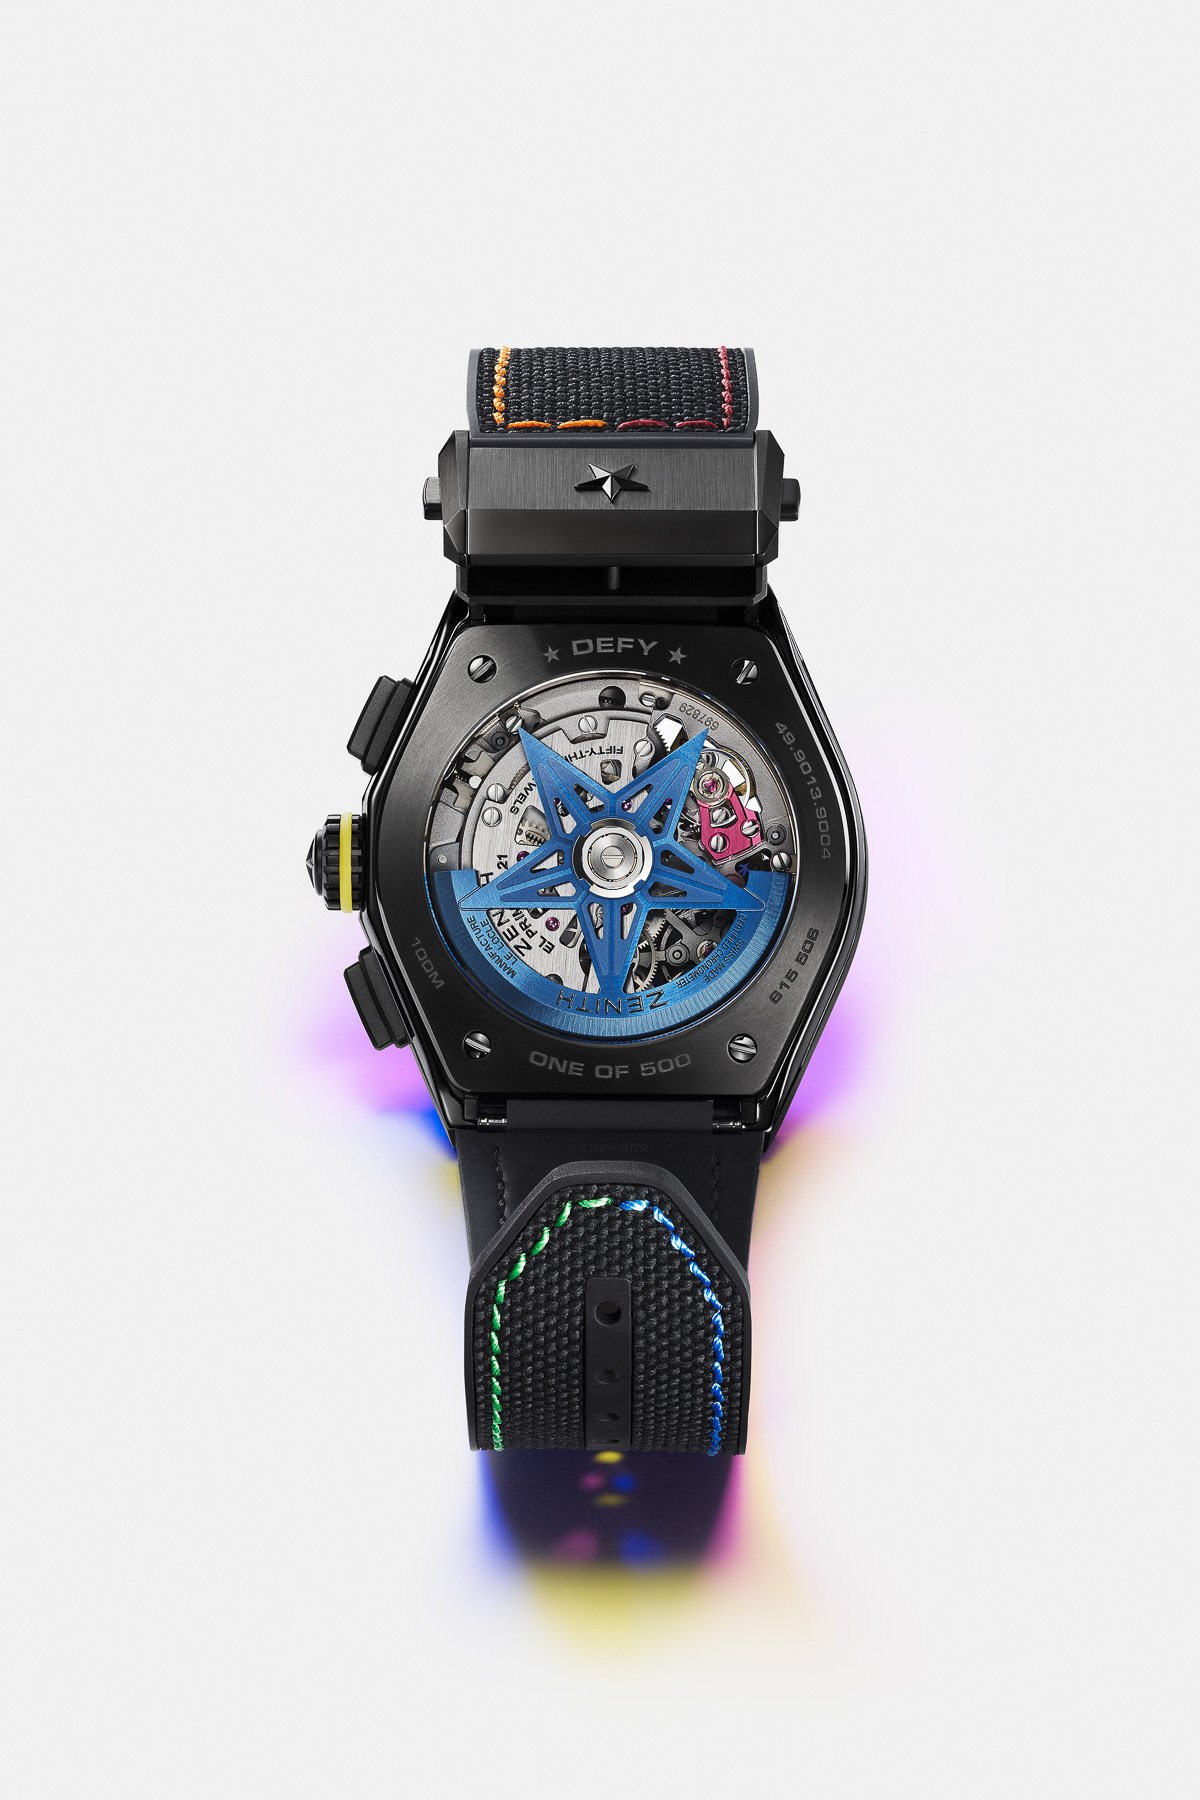 Introducing The Zenith Defy Chroma II Watches –